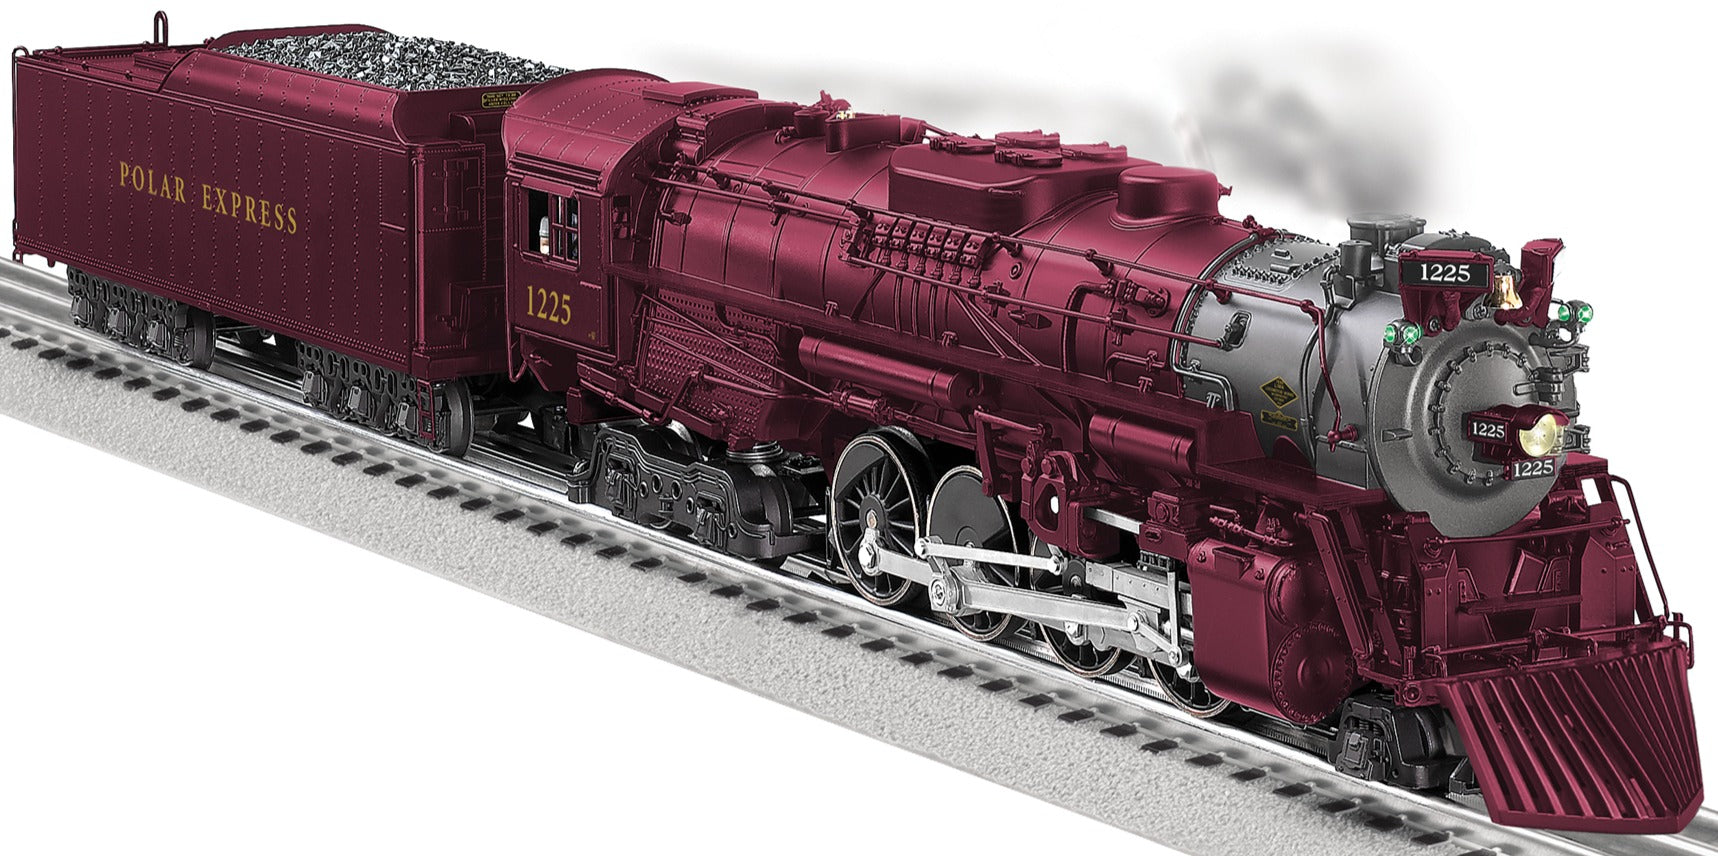 Lionel 2431480 - Legacy Berkshire Steam Locomotive "The Polar Express" #1225 (Special Edition Red)